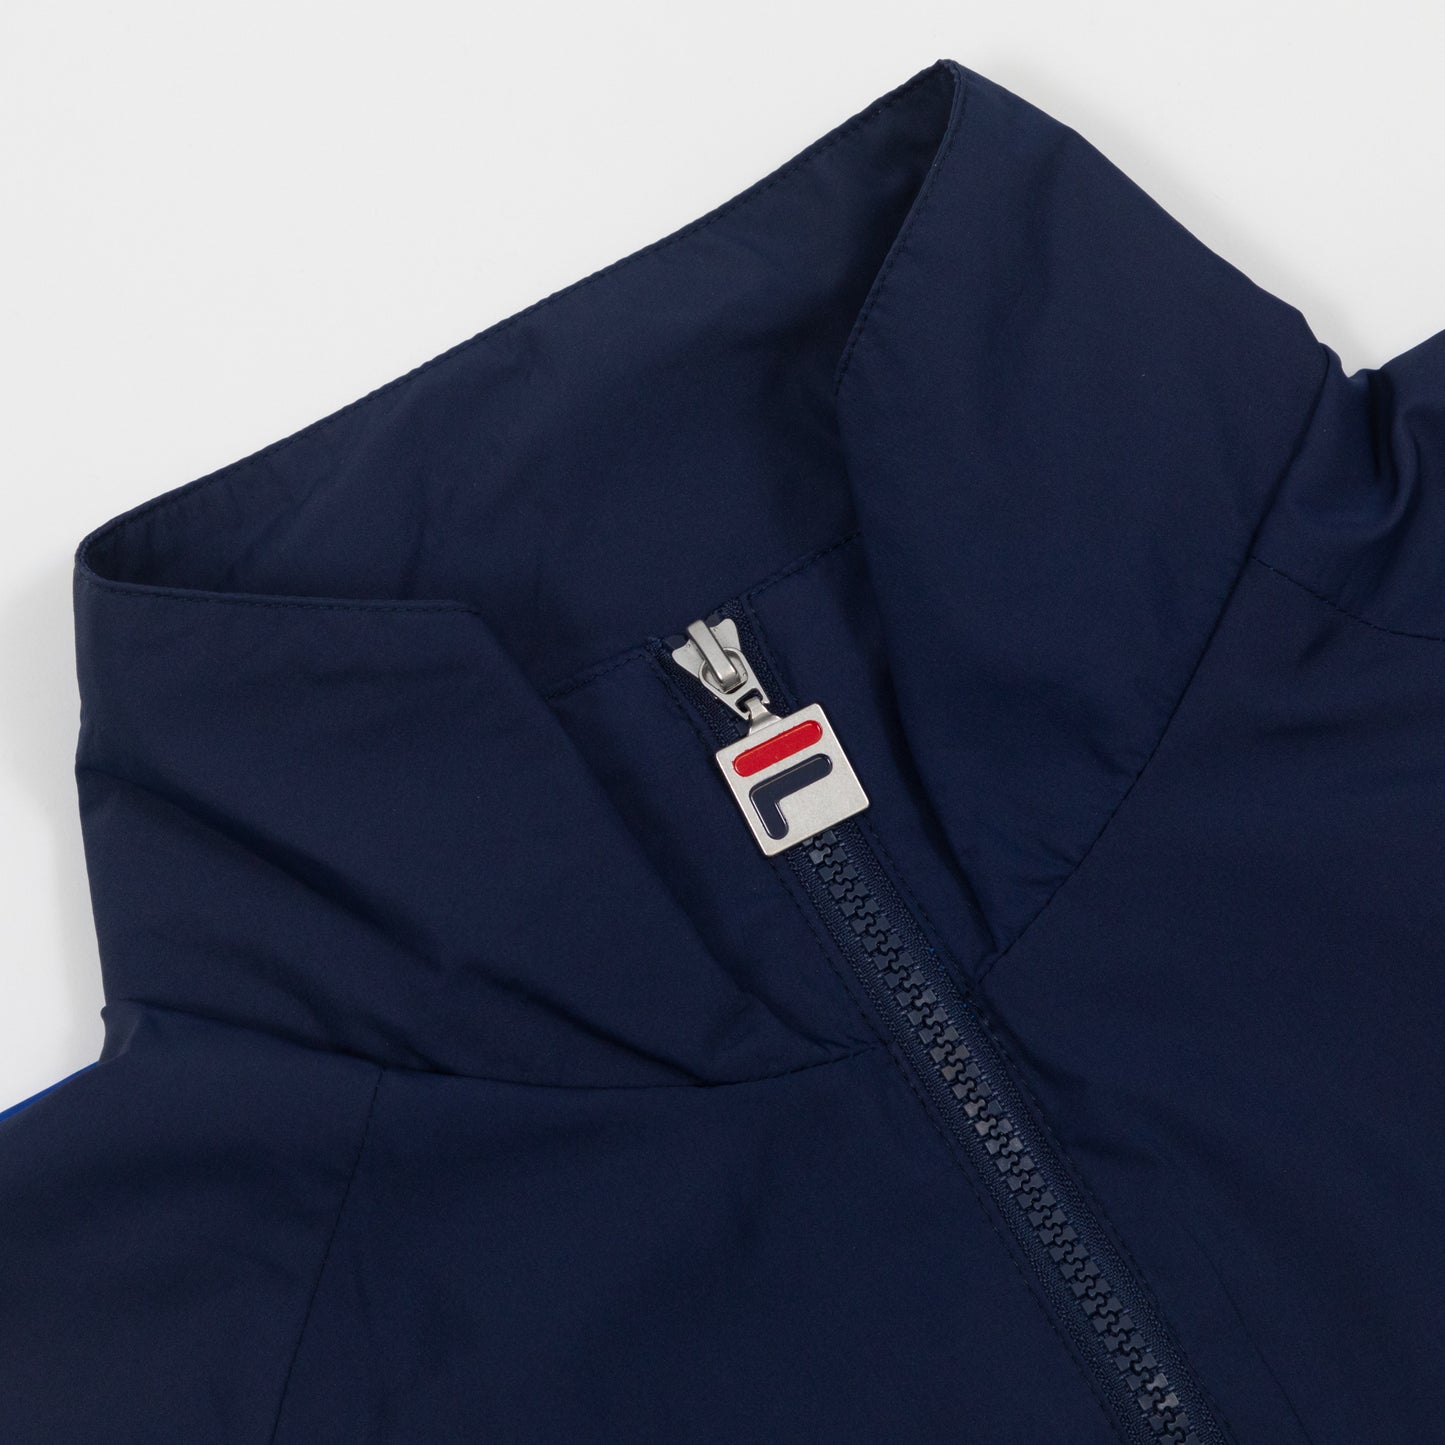 FILA Cut Sew Panelled Track Jacket in BLUE & WHITE